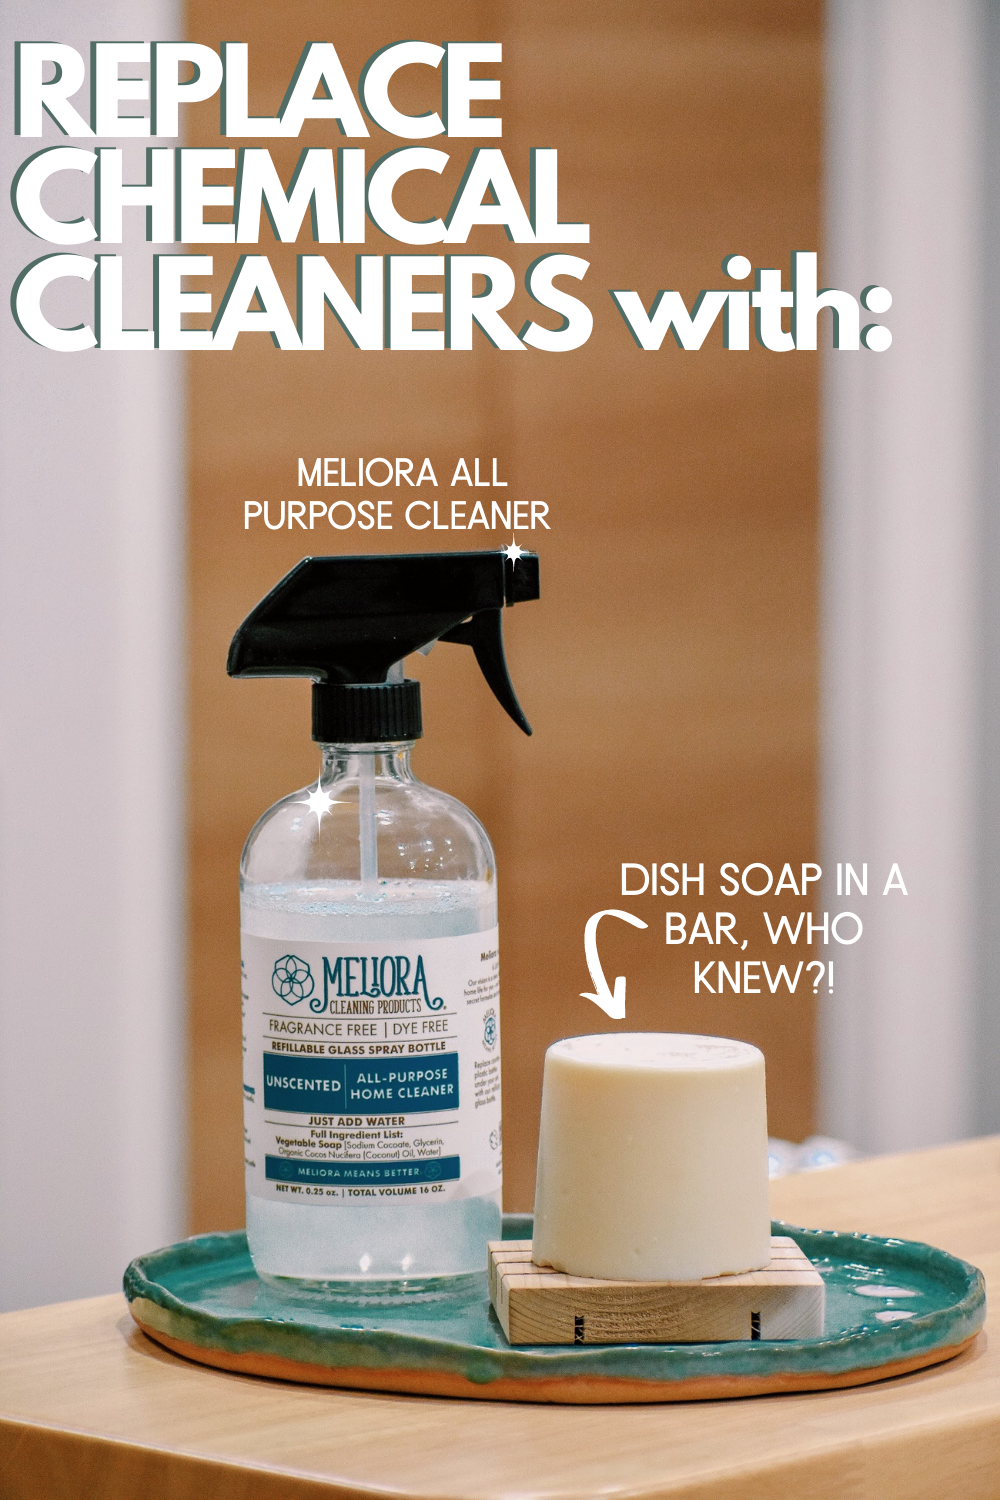 MELIORA CLEANING AND DISH SOAP BAR